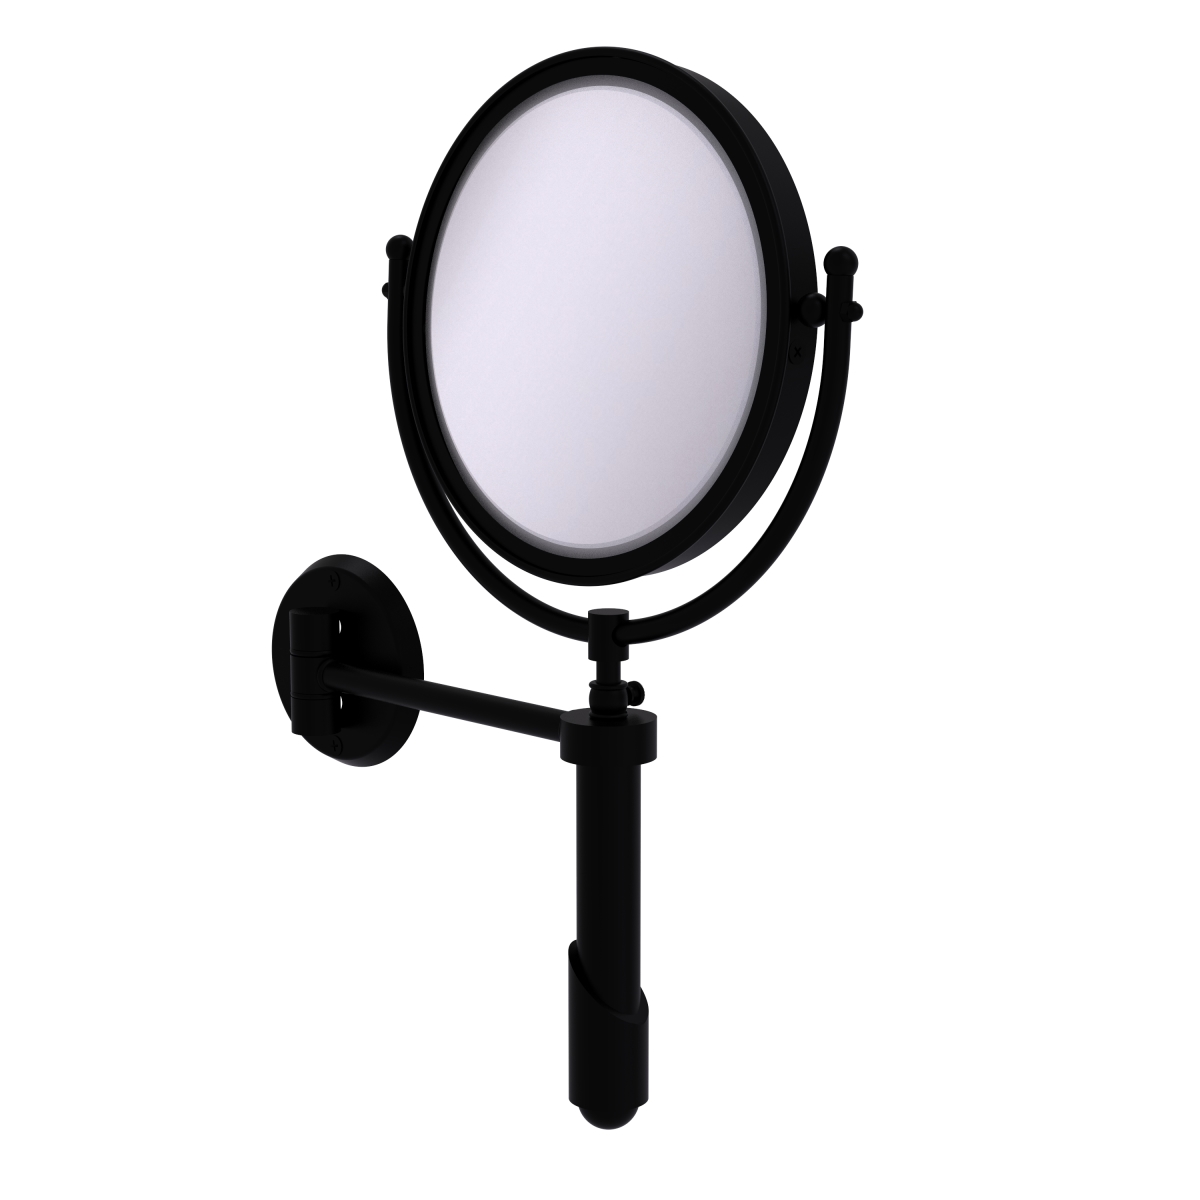 SHM-8-2X-BKM Soho Collection Wall Mounted Make-Up Mirror 8 in. dia. with 2X Magnification, Matte Black -  Allied Brass, SHM-8/2X-BKM